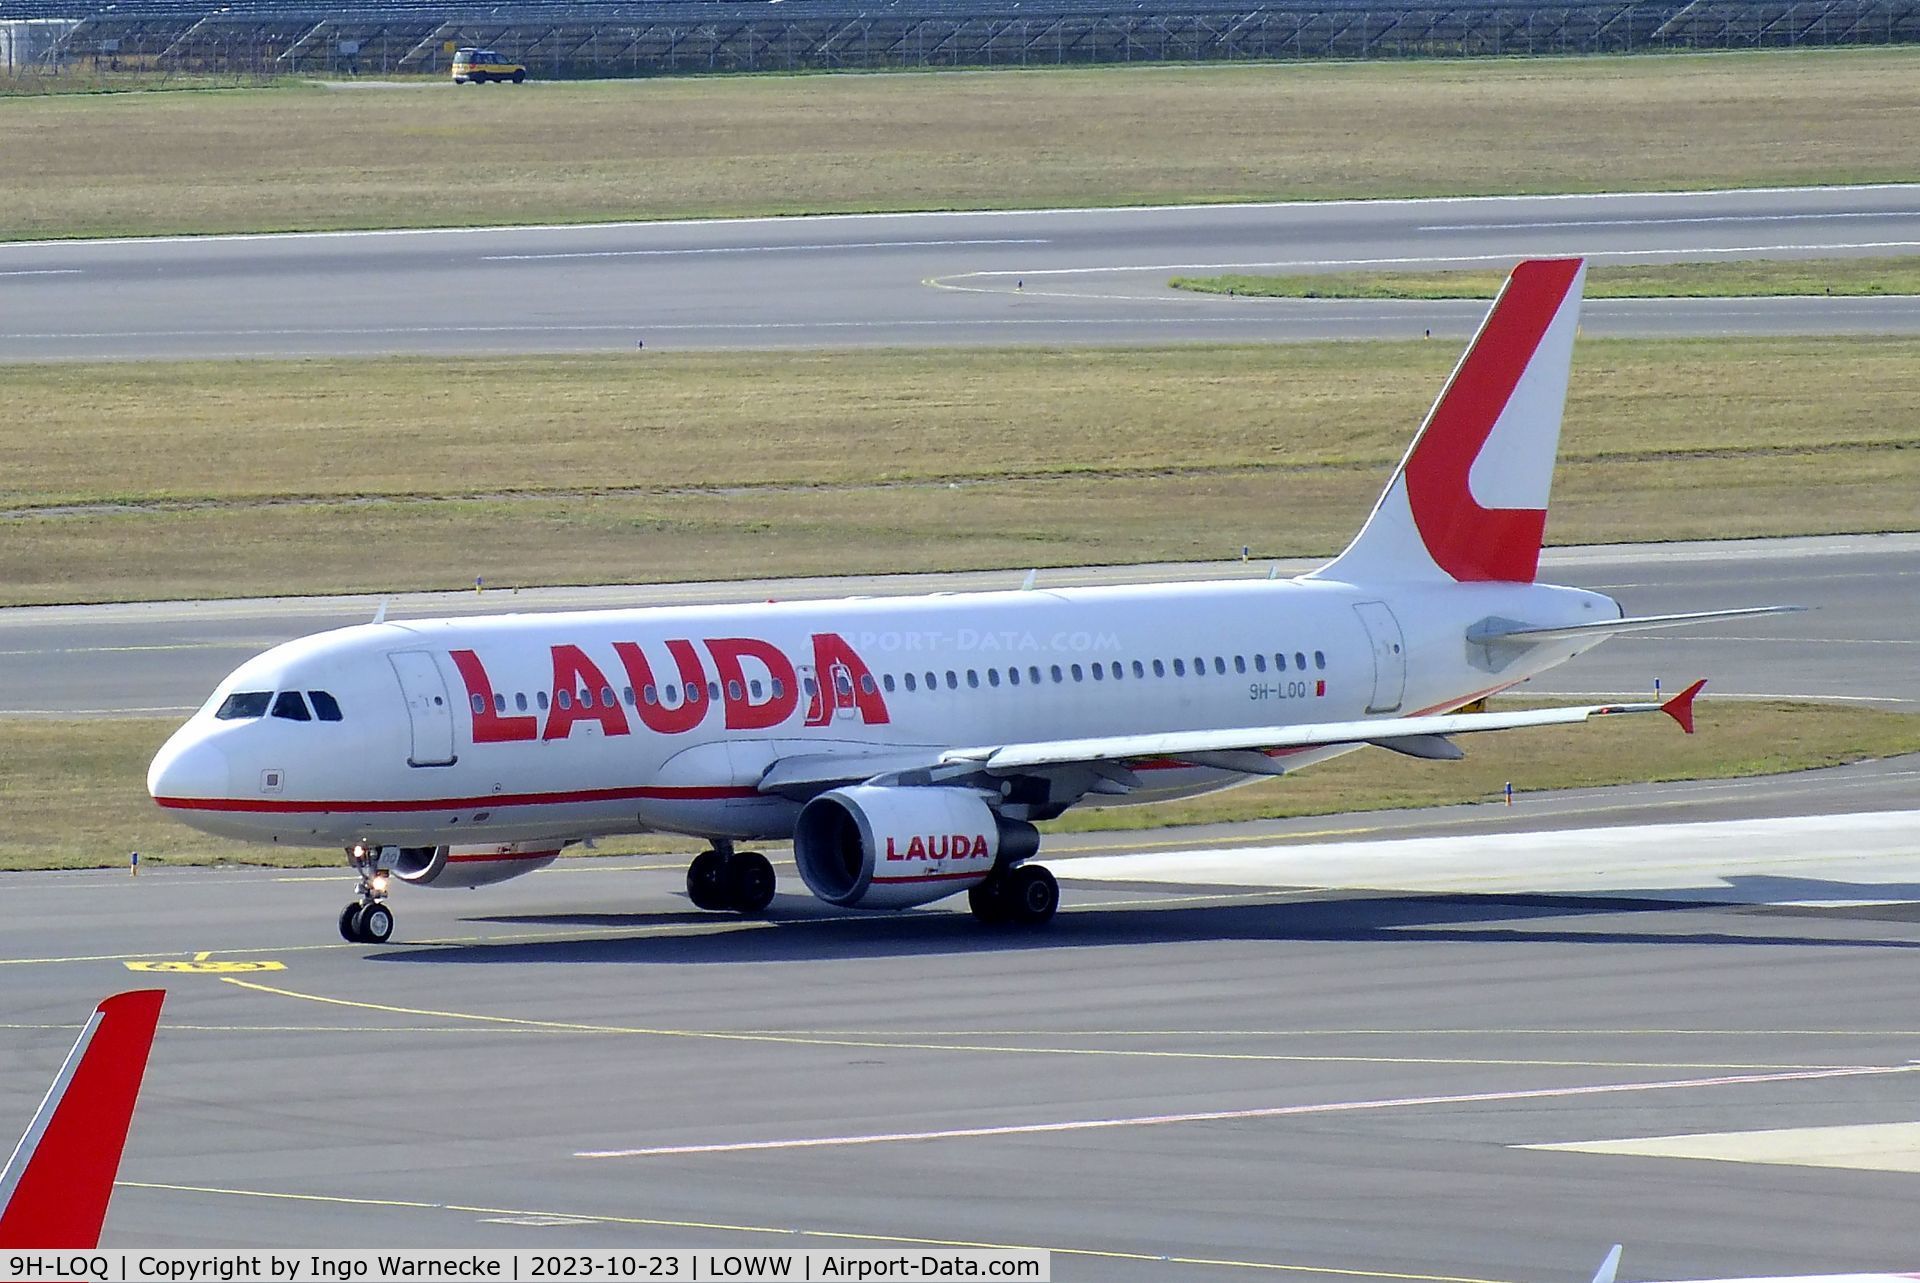 9H-LOQ, 2007 Airbus A320-214 C/N 3131, Airbus A320-214 of Lauda Europe at Wien-Schwechat airport